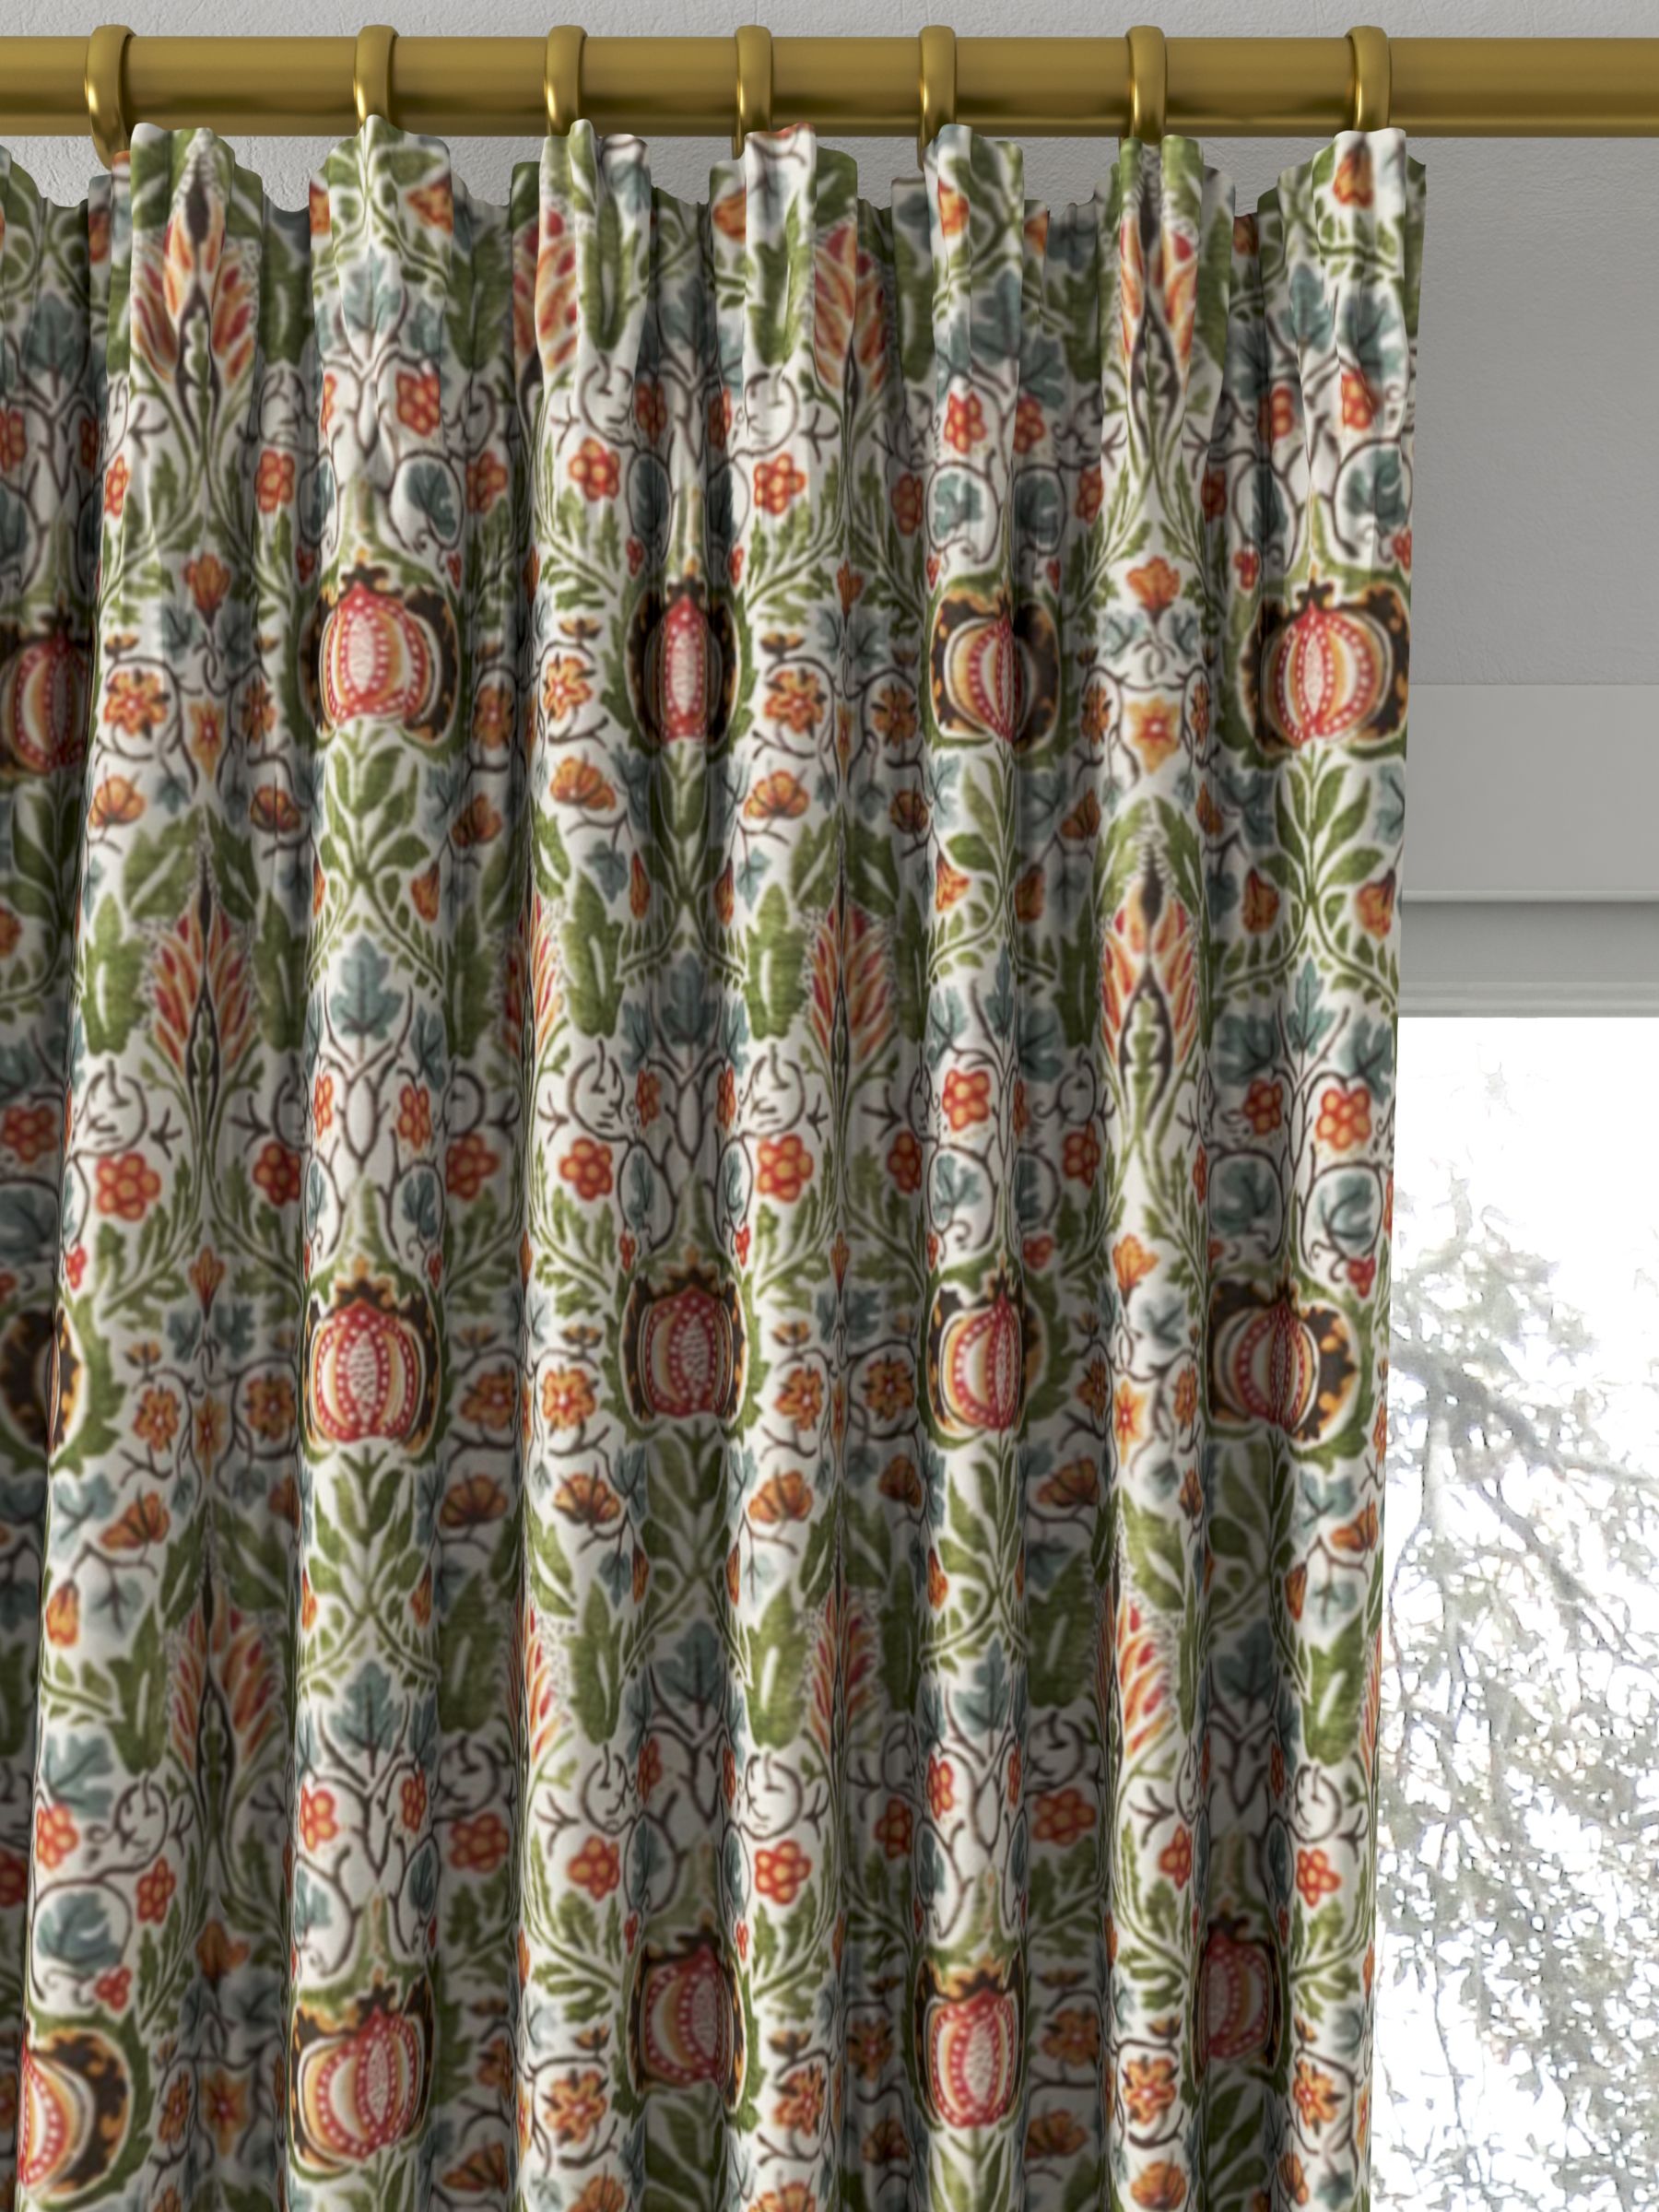 Morris & Co. Little Chintz Made to Measure Curtains, Olive/Ochre